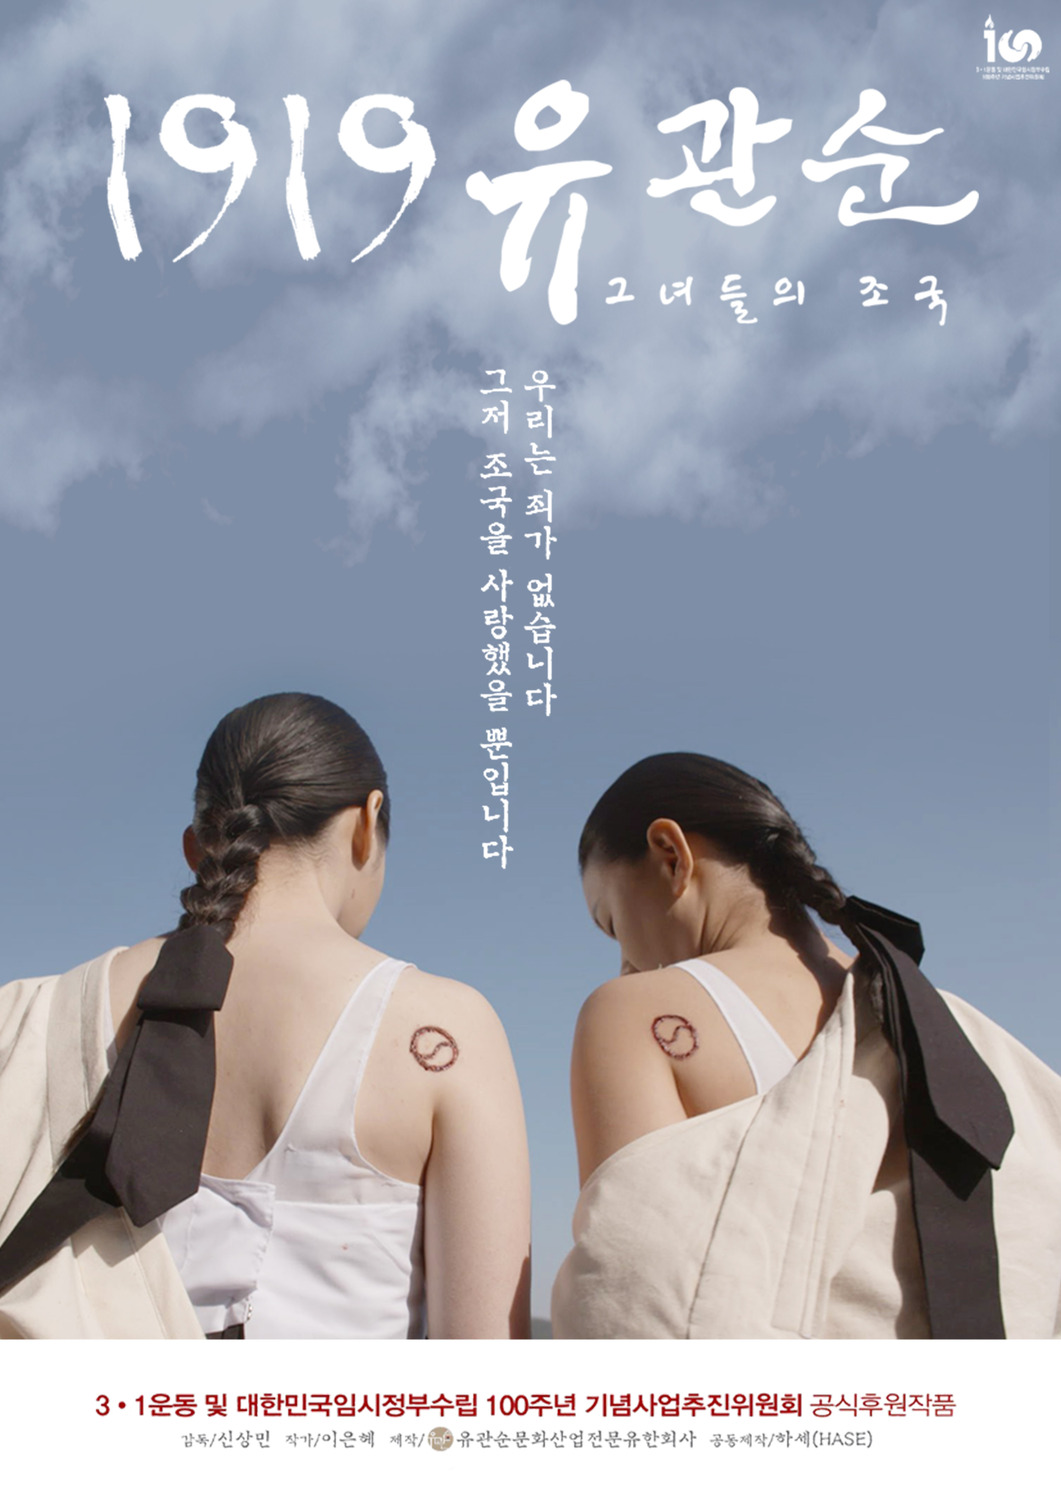 Extra Large Movie Poster Image for 1919 Yu Gwan-sun 